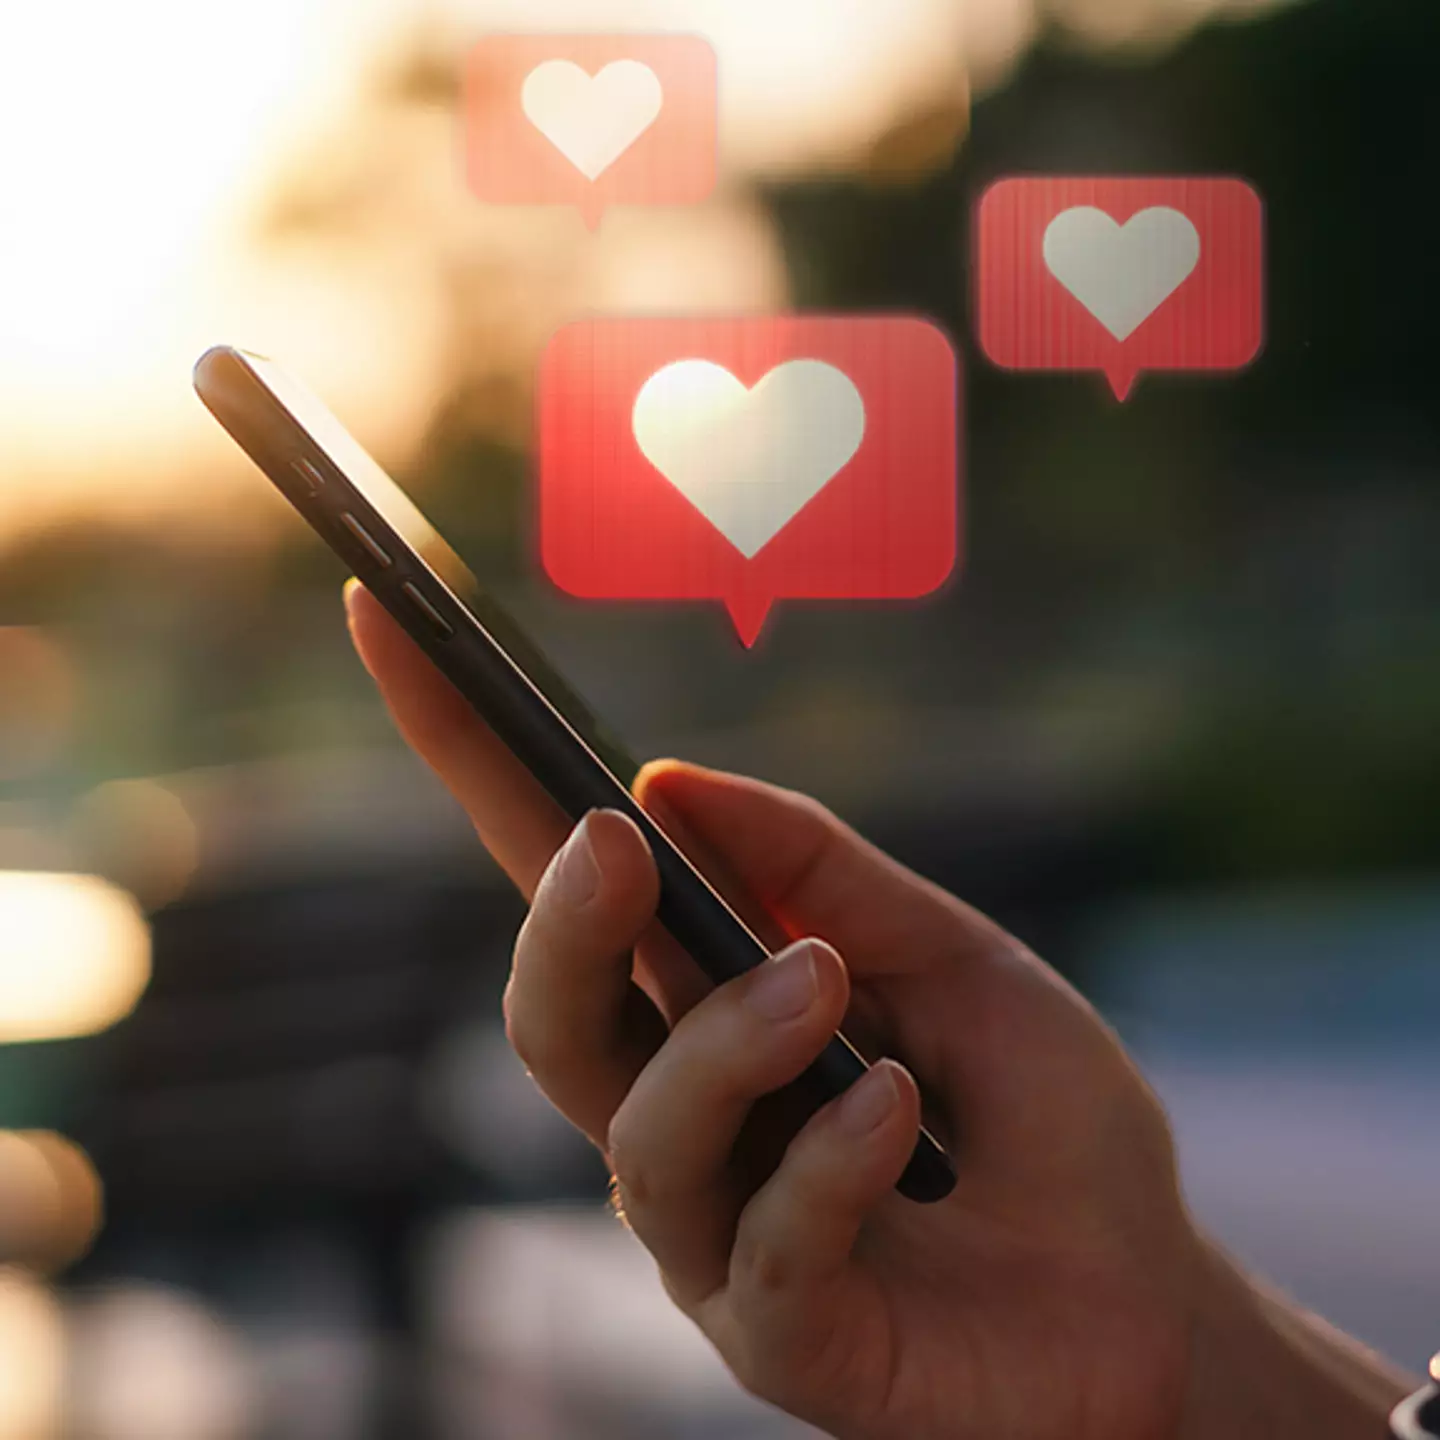 Single people warned of new online dating trend 'avalanching' ahead of Valentine's Day